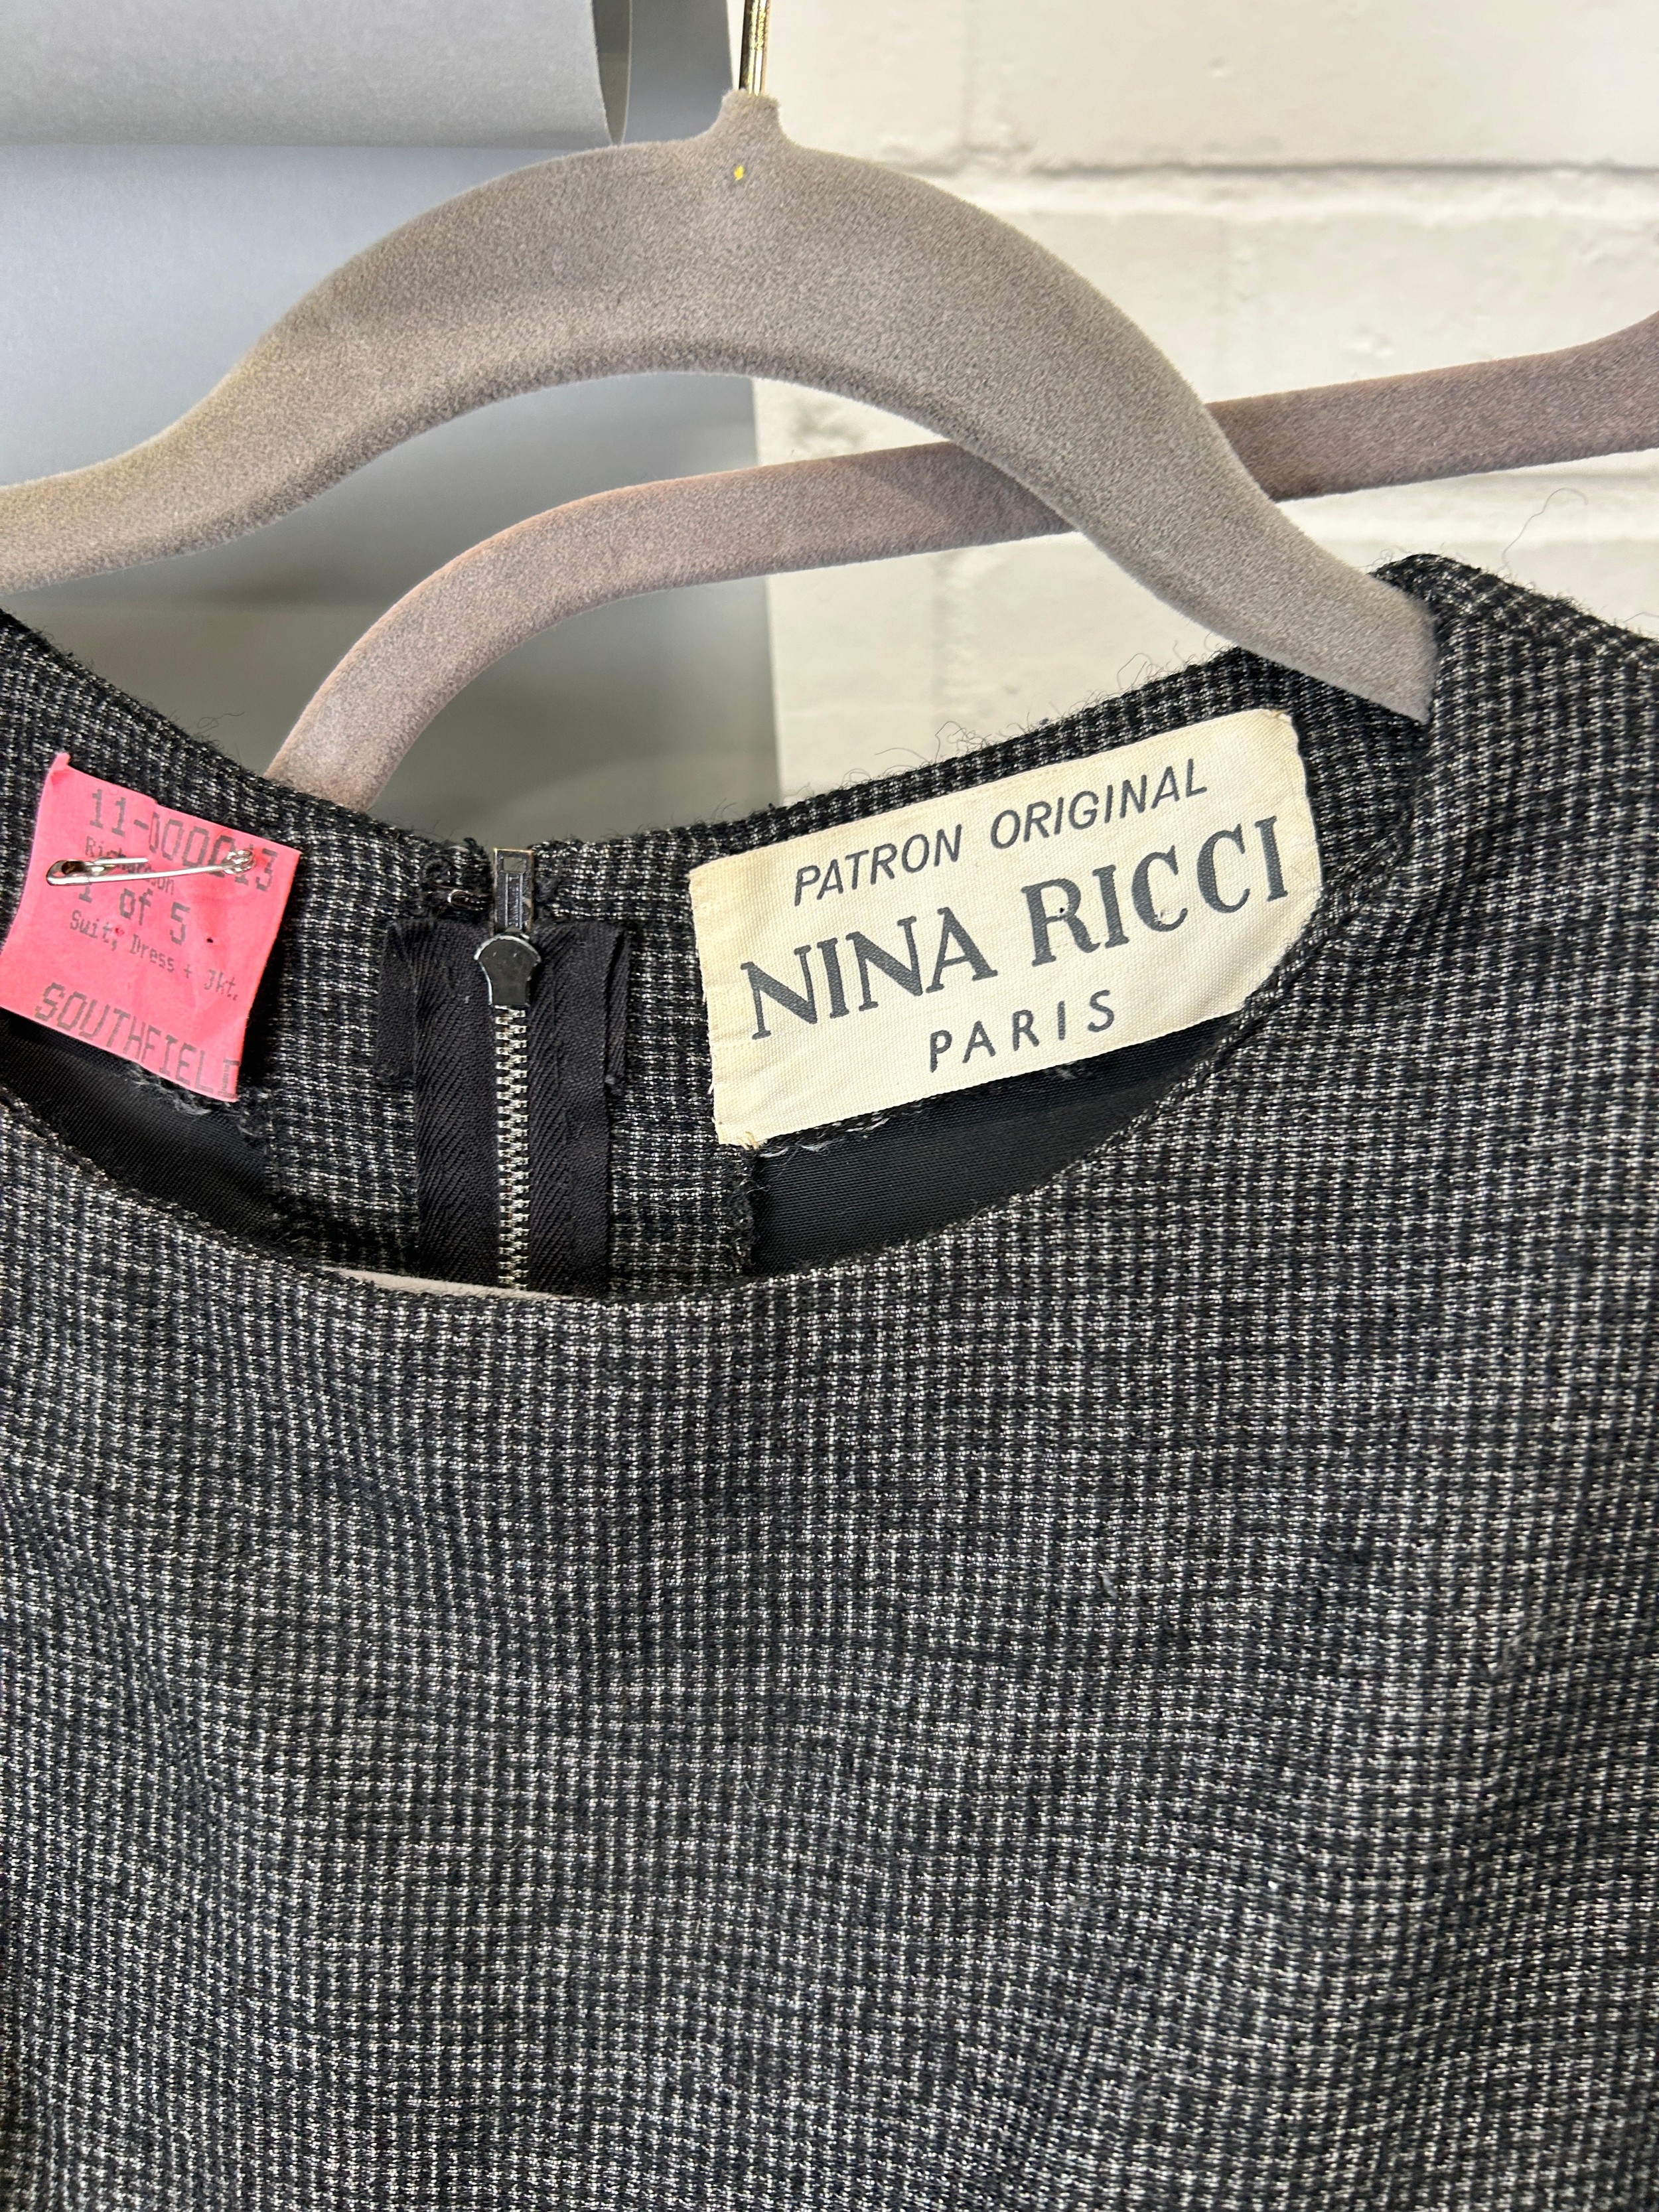 A COLLECTION OF DESIGNER DRESSES TO INCLUDE ARMANI, NINA RICCI - Image 2 of 6